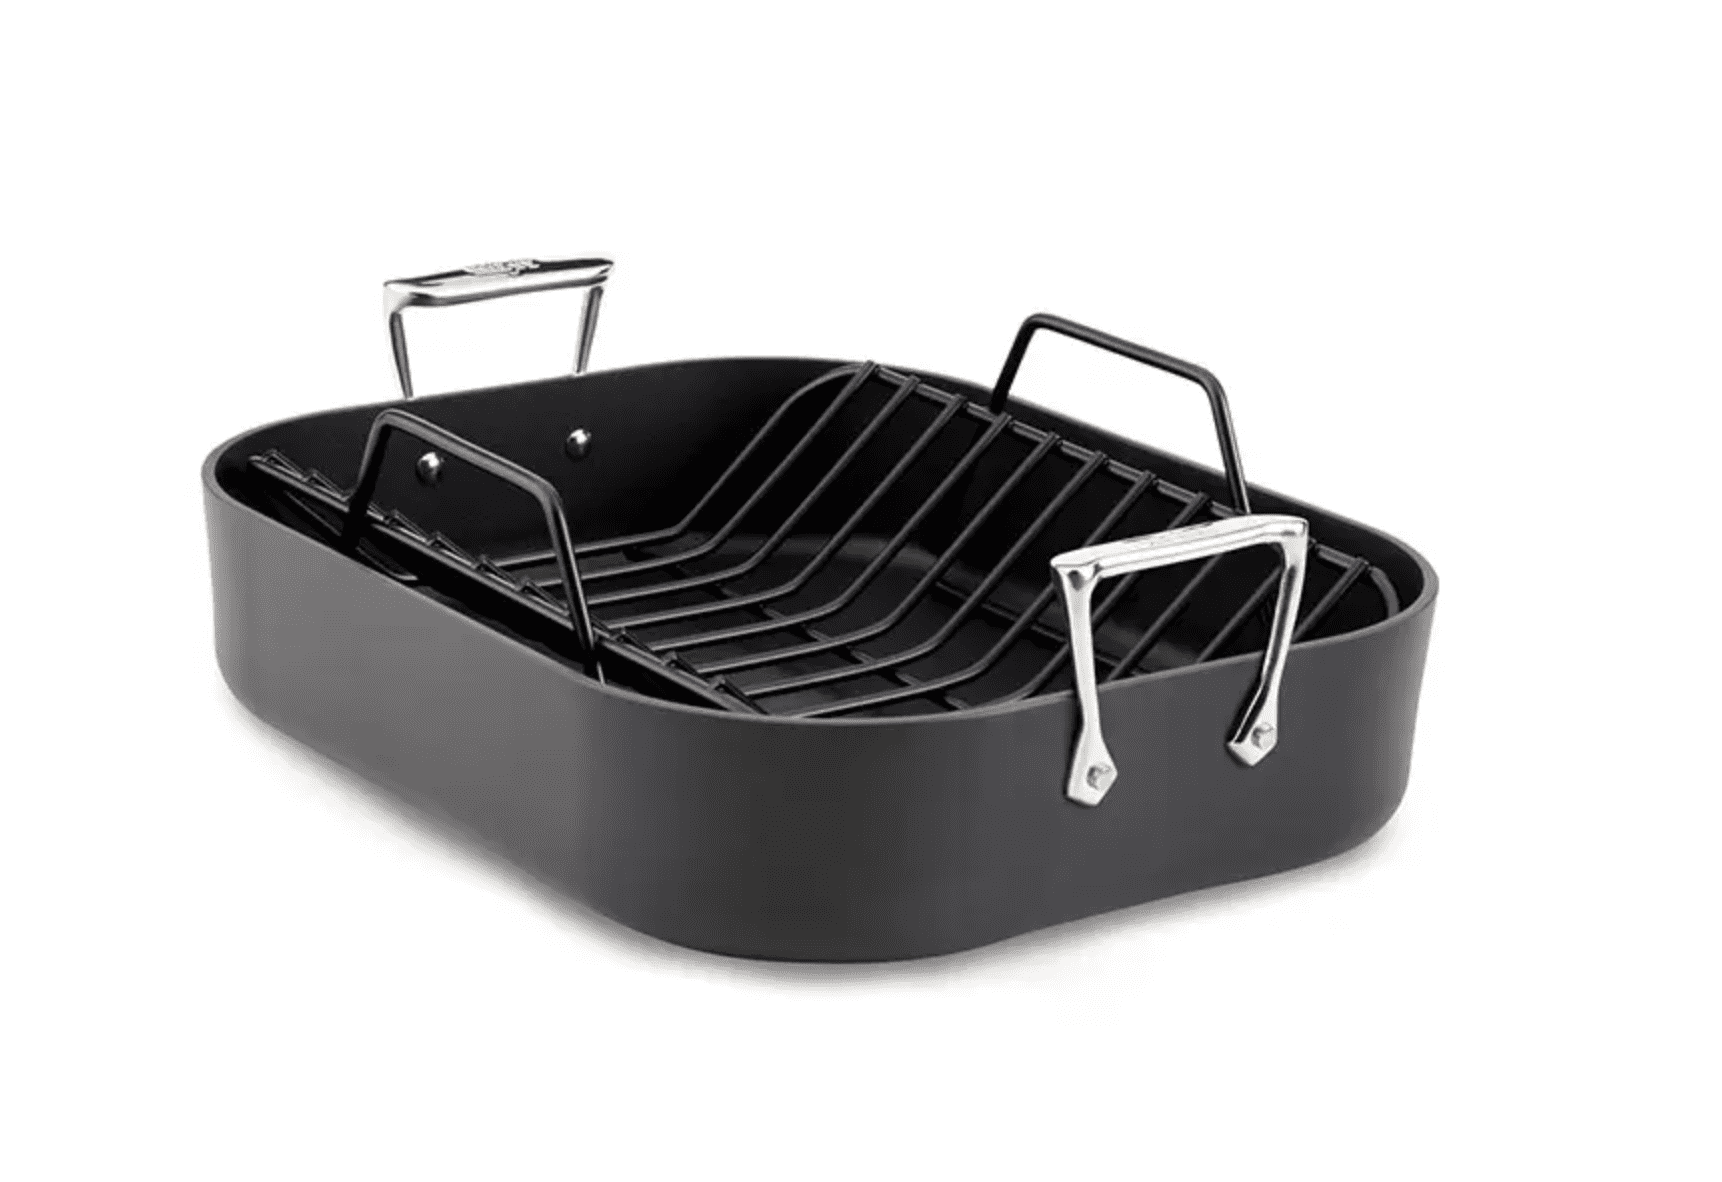 http://cdn.apartmenttherapy.info/image/upload/v1665425820/gen-workflow/product-database/All-Clad_Hard_Anodized_Nonstick_13_x_16_roaster.png